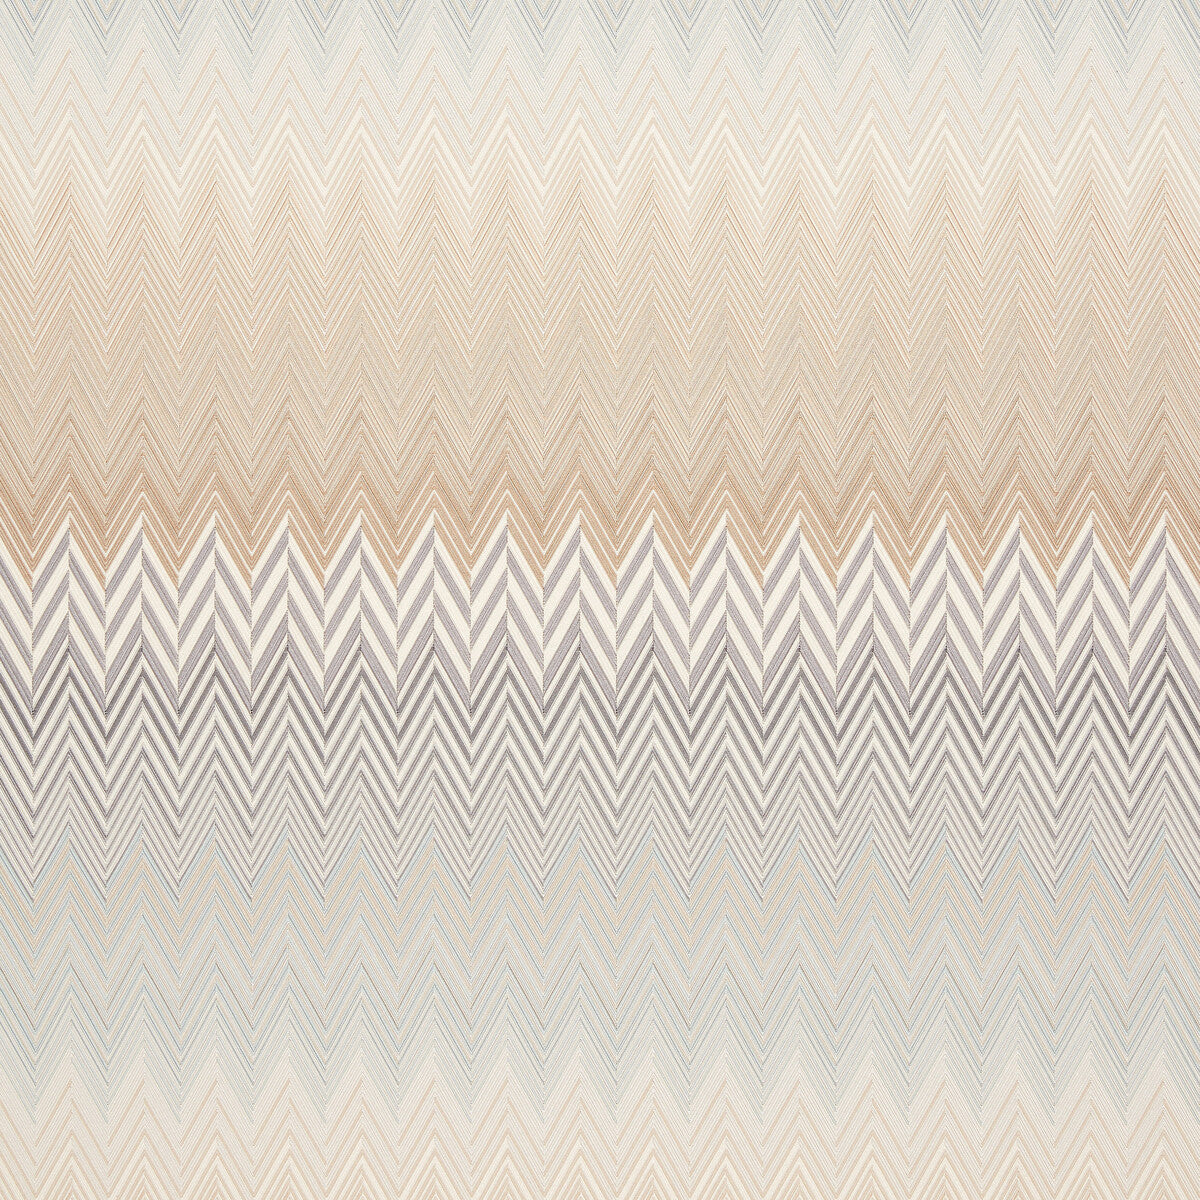 Bastia Fr fabric in 148 color - pattern 36705.1611.0 - by Kravet Couture in the Missoni Home collection